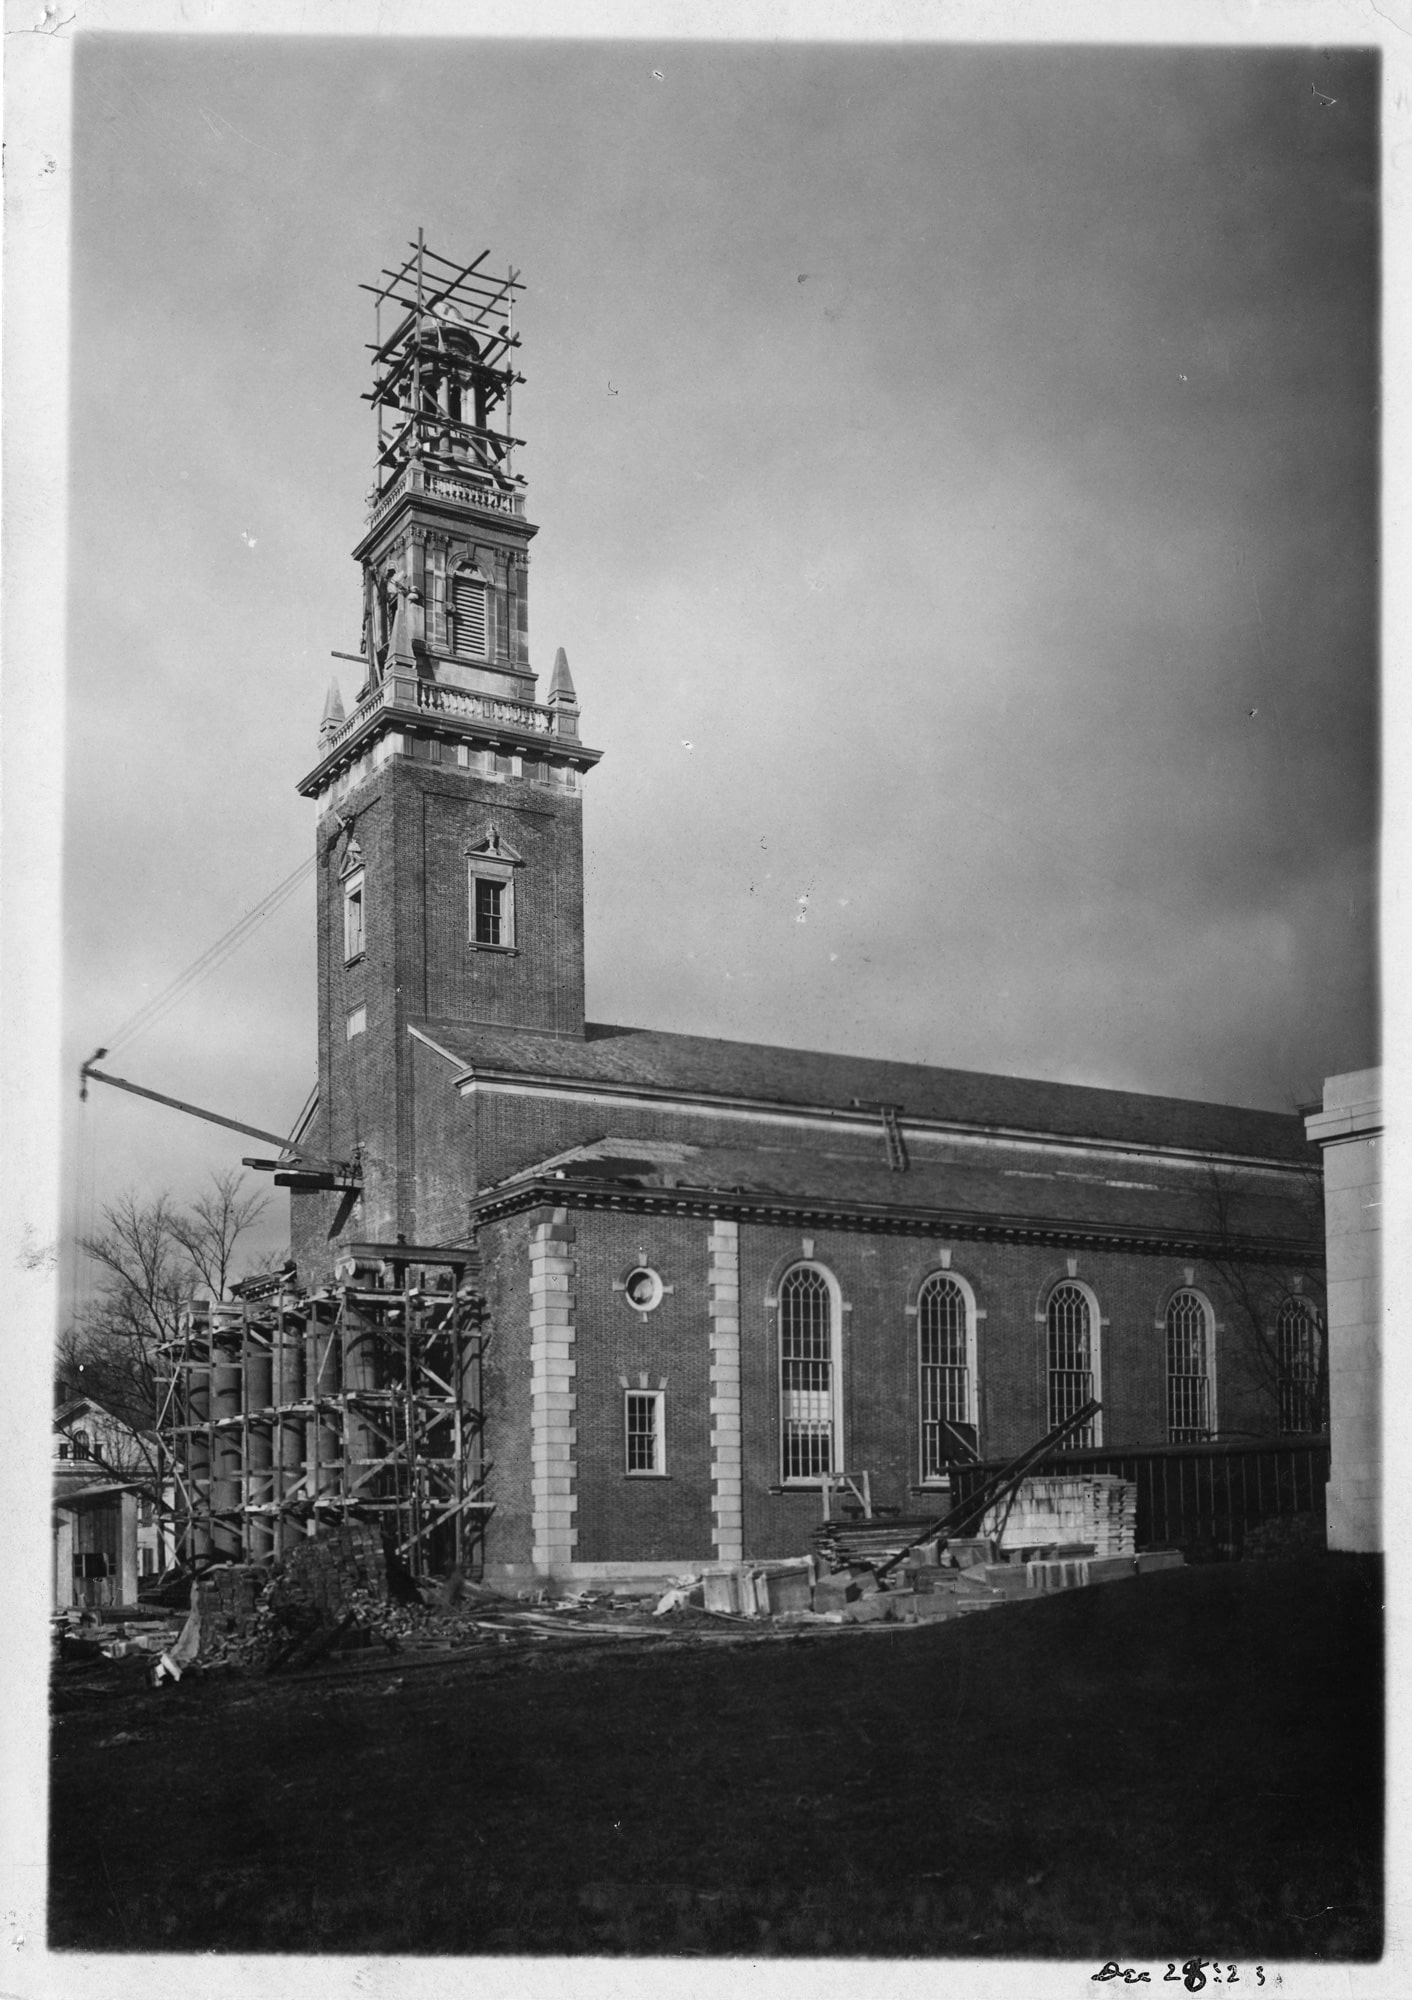 Swasey Chapel under construction